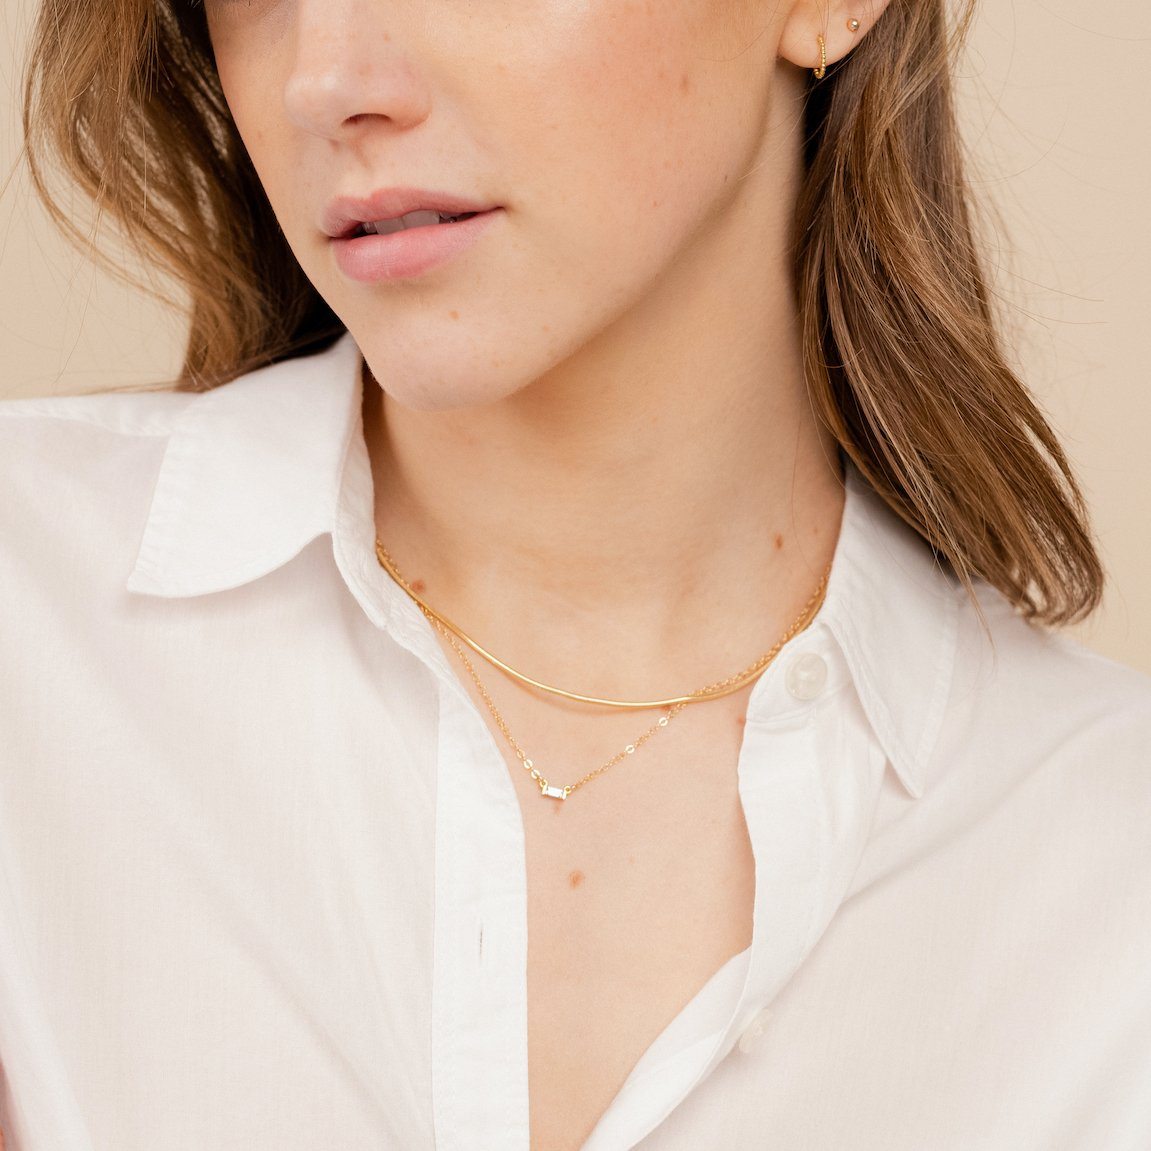 The dainty gold Elegant Necklace Set by Katie Dean Jewelry as seen on a model wearing a white button up collared shirt and dainty gold stud earrings